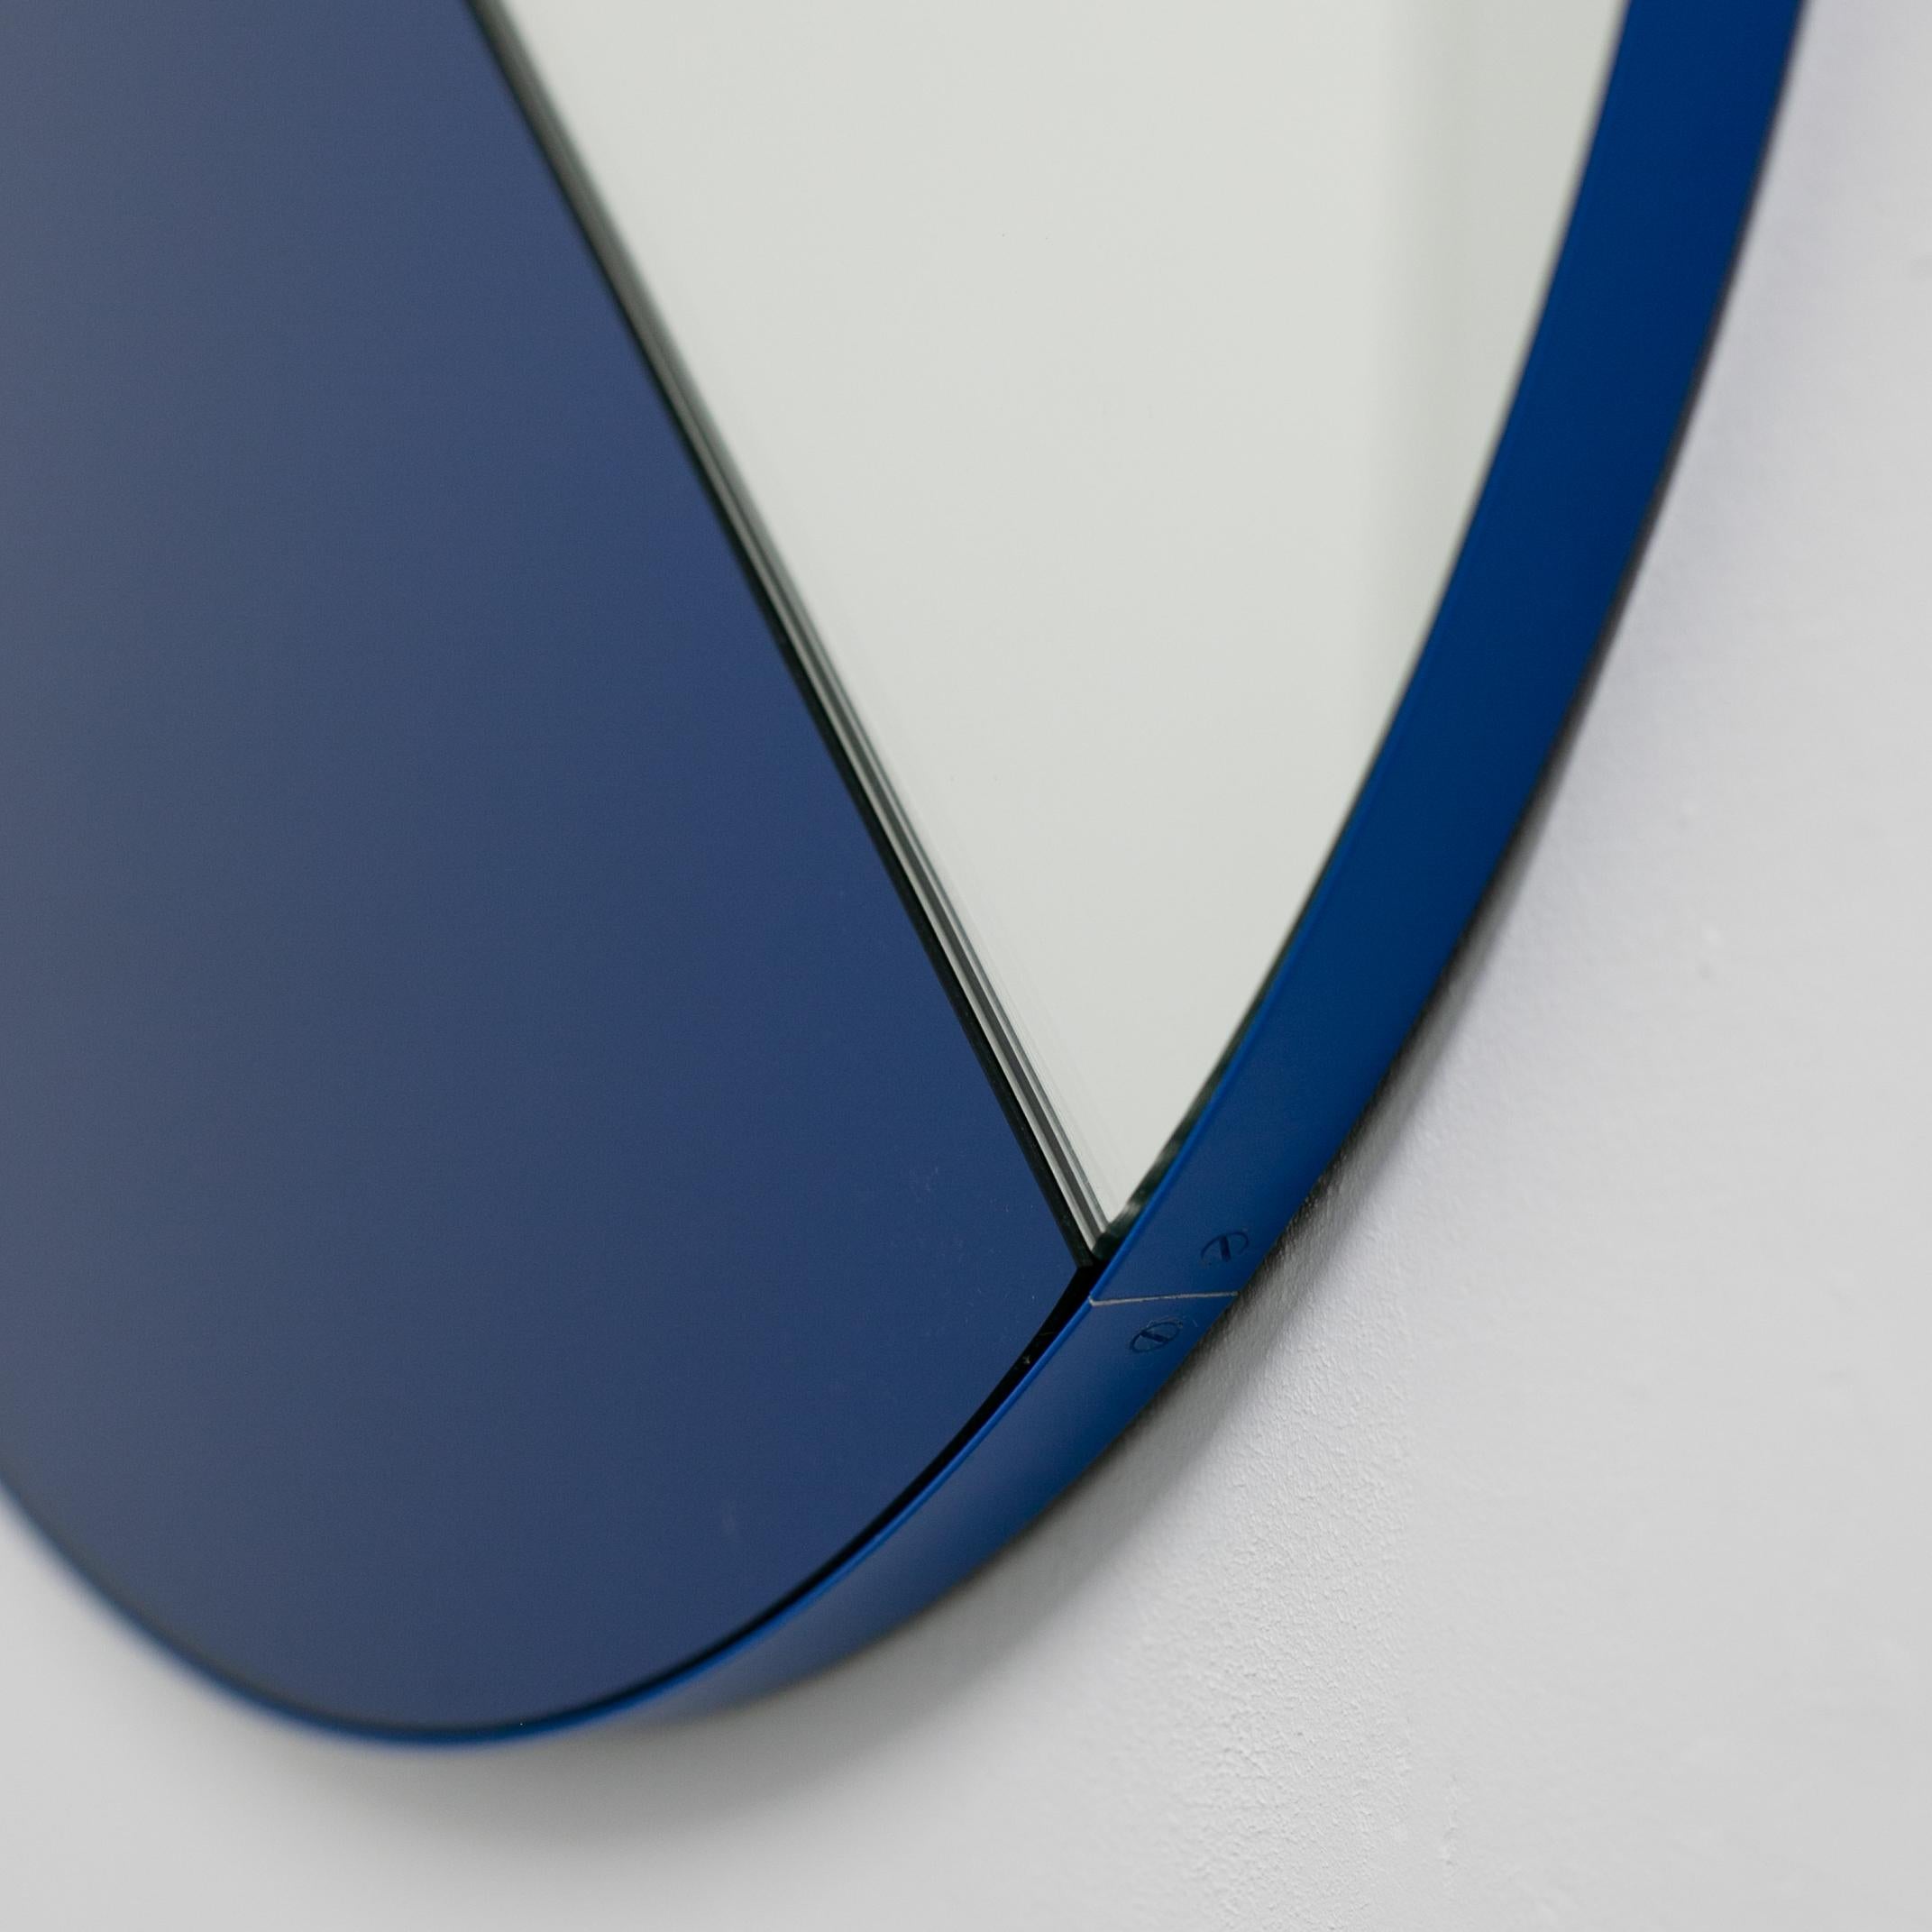 In Stock Orbis Dualis Blue and Silver Tint Round Mirror with Blue Frame, Medium For Sale 1